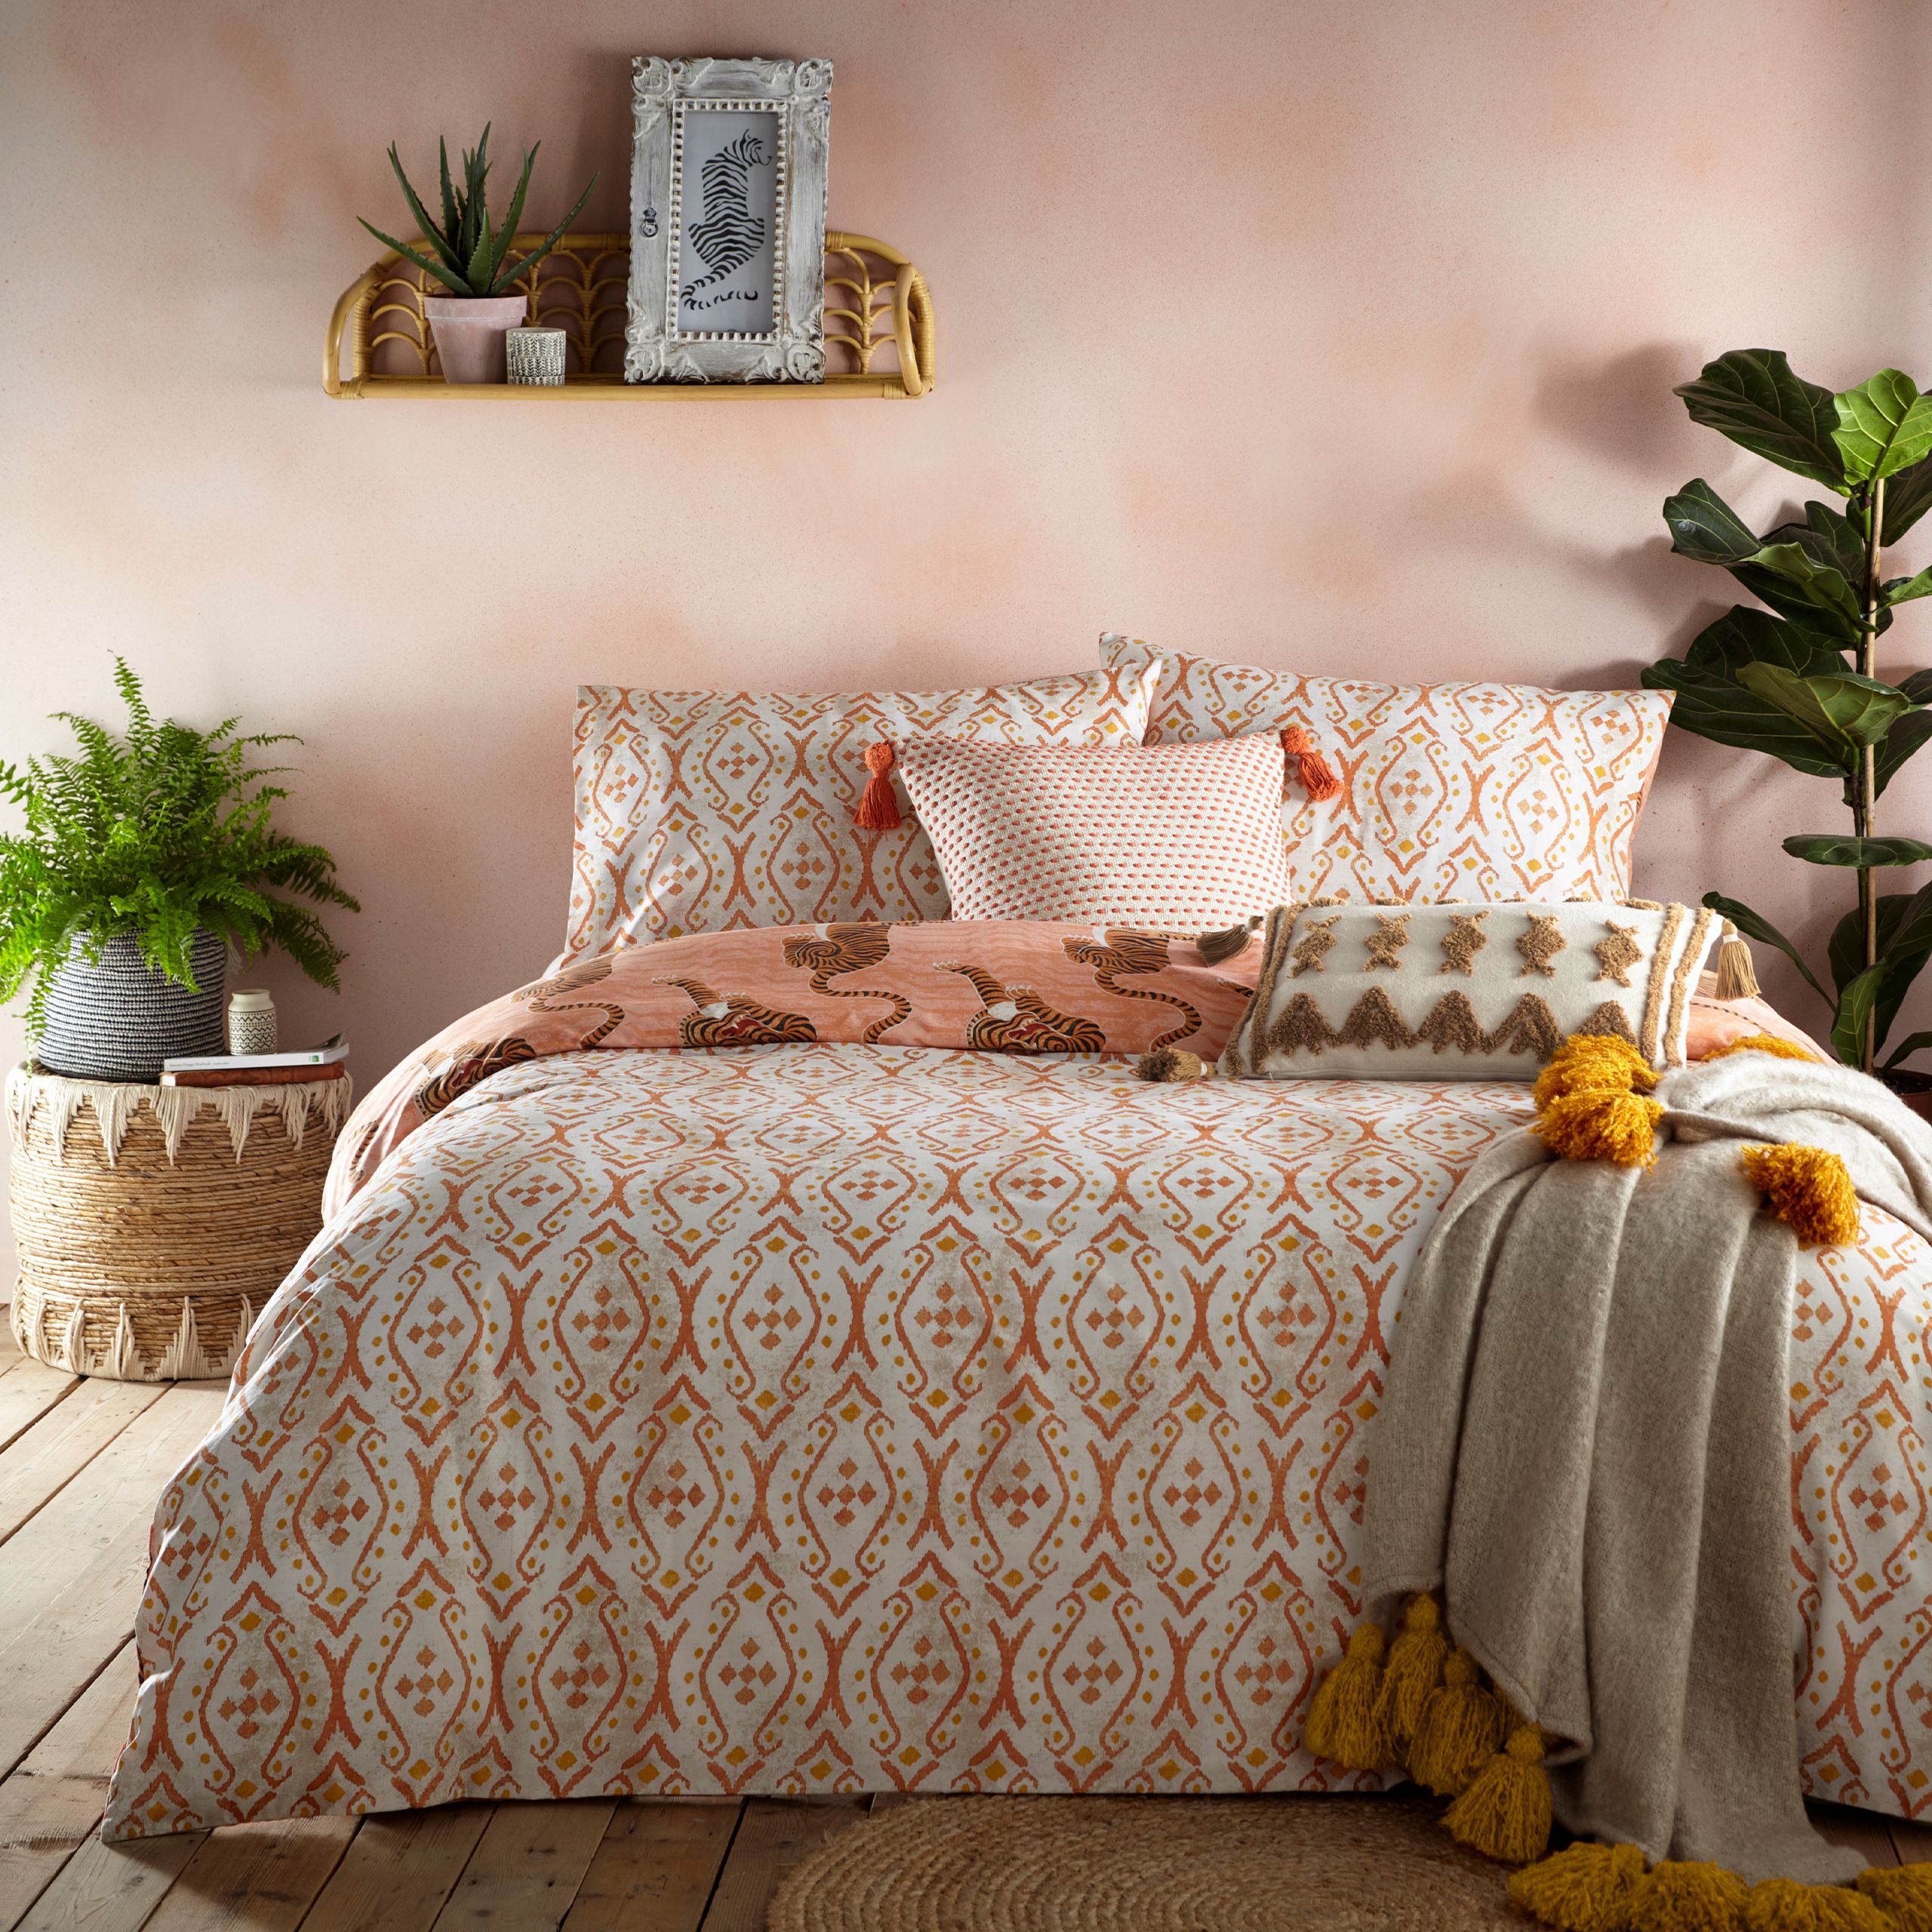 Add instant personality into your bedroom with this showstopping Tibetan Tiger bedding, featuring tribal-inspired prints and crawling tigers. Fully reversible design, so you can switch the look when you need to.